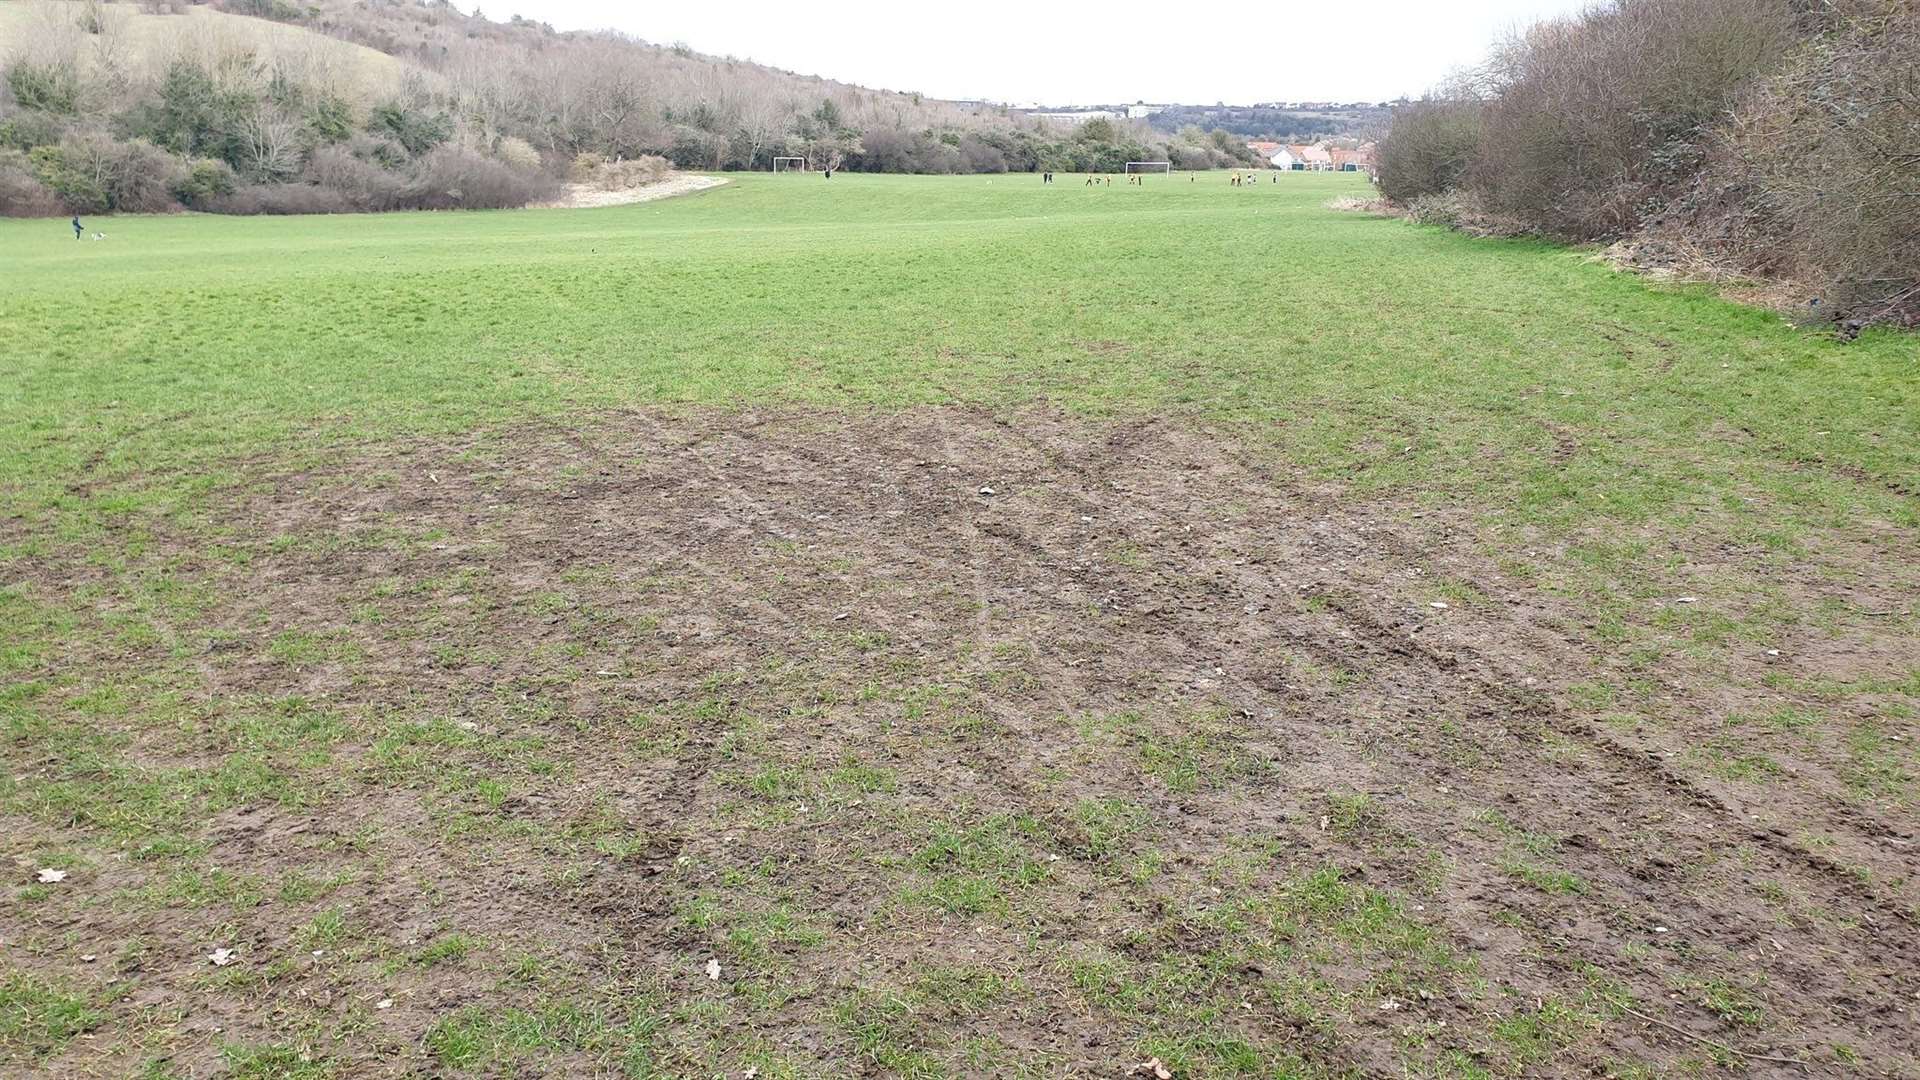 Residents say bikers are regularly churning up land at Barnfield Recreation Ground in Chatham. Images: @BarnfieldBikes